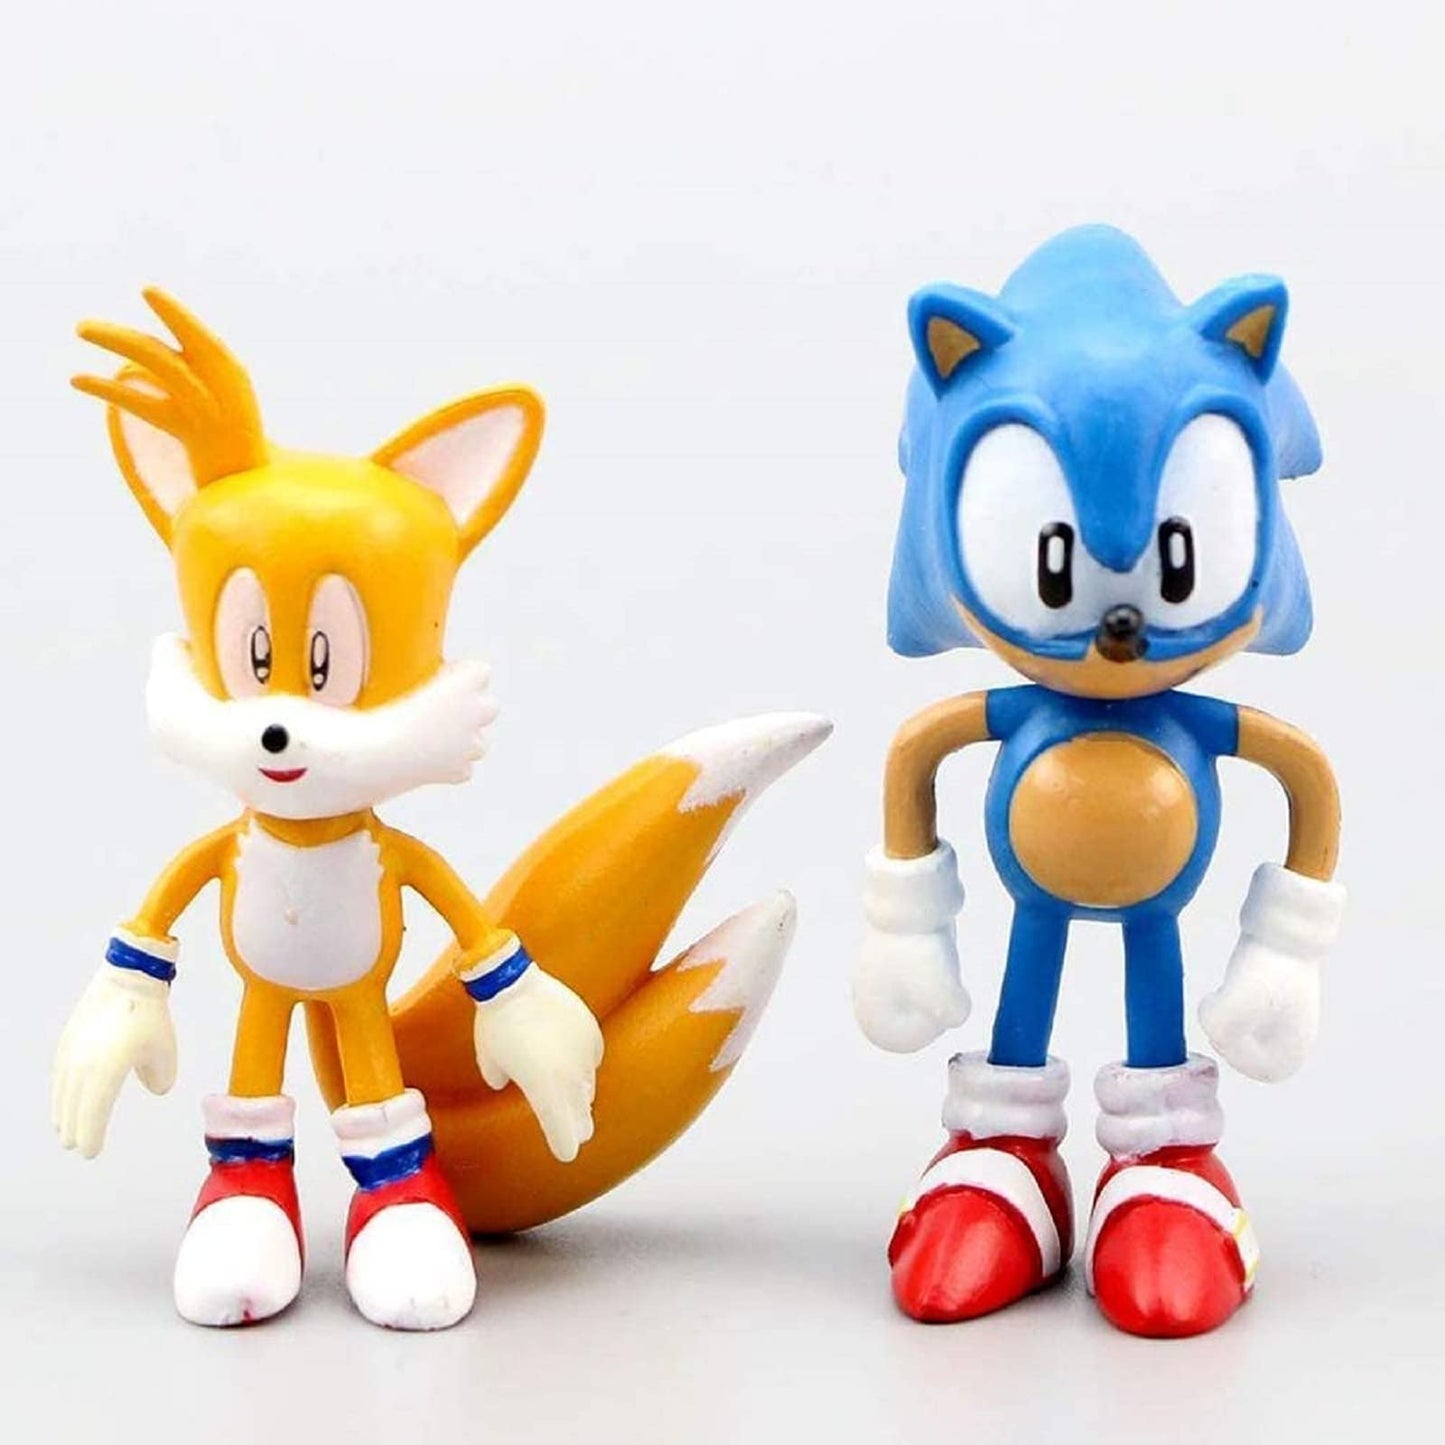 6PS D3 Sonic Toys,Sonic The Hedgehog,Action Figures,Party Supplies Decorations,Sonic Character Toy Series or Gifts for Children of Sonic The Hedgehog Fans